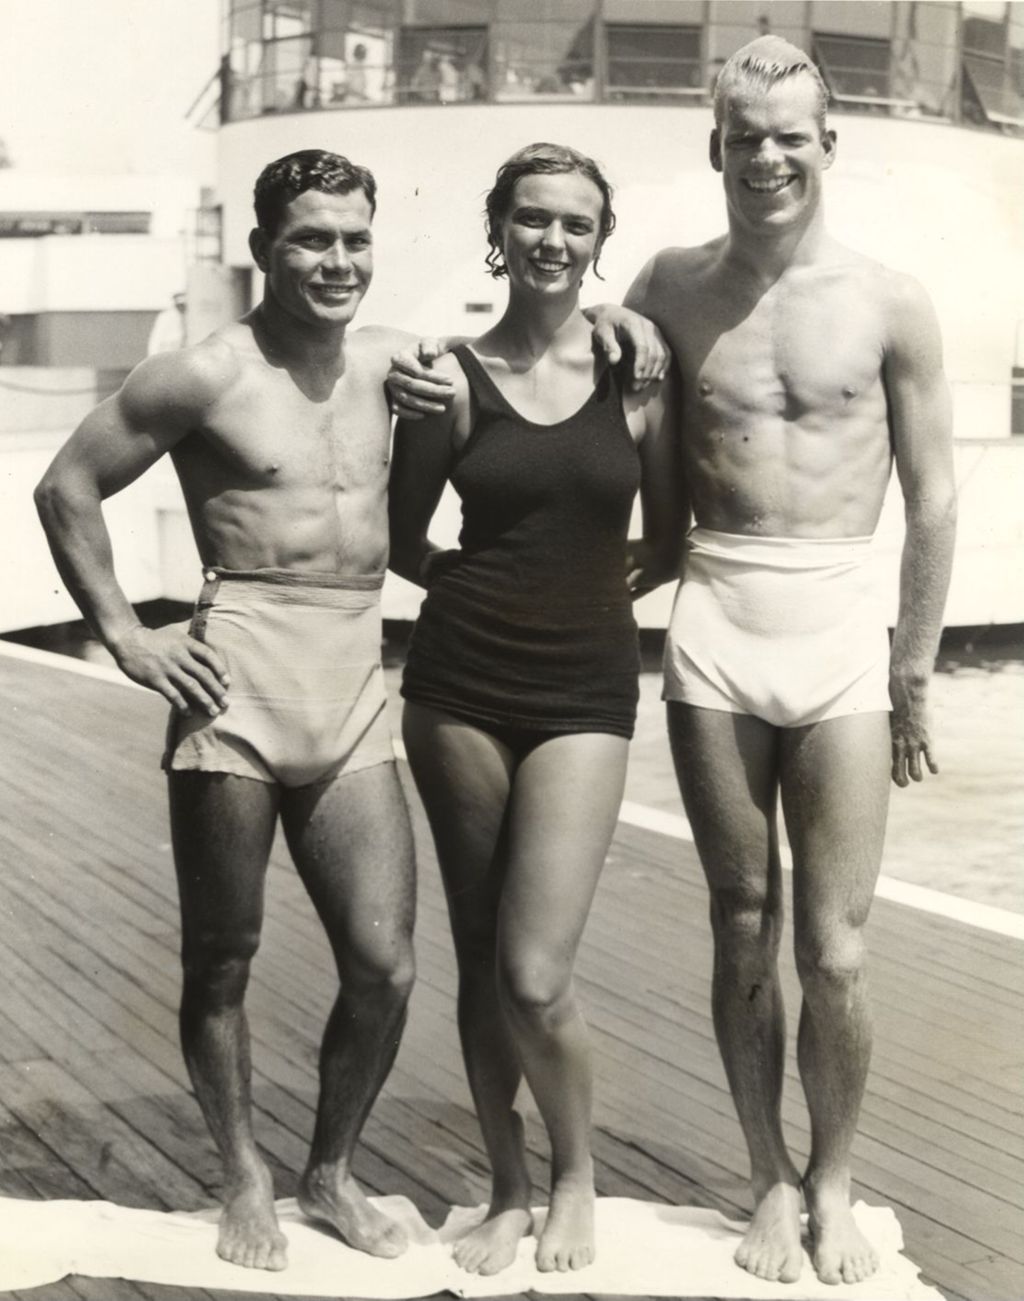 Beauty contest winner with famous swimmers